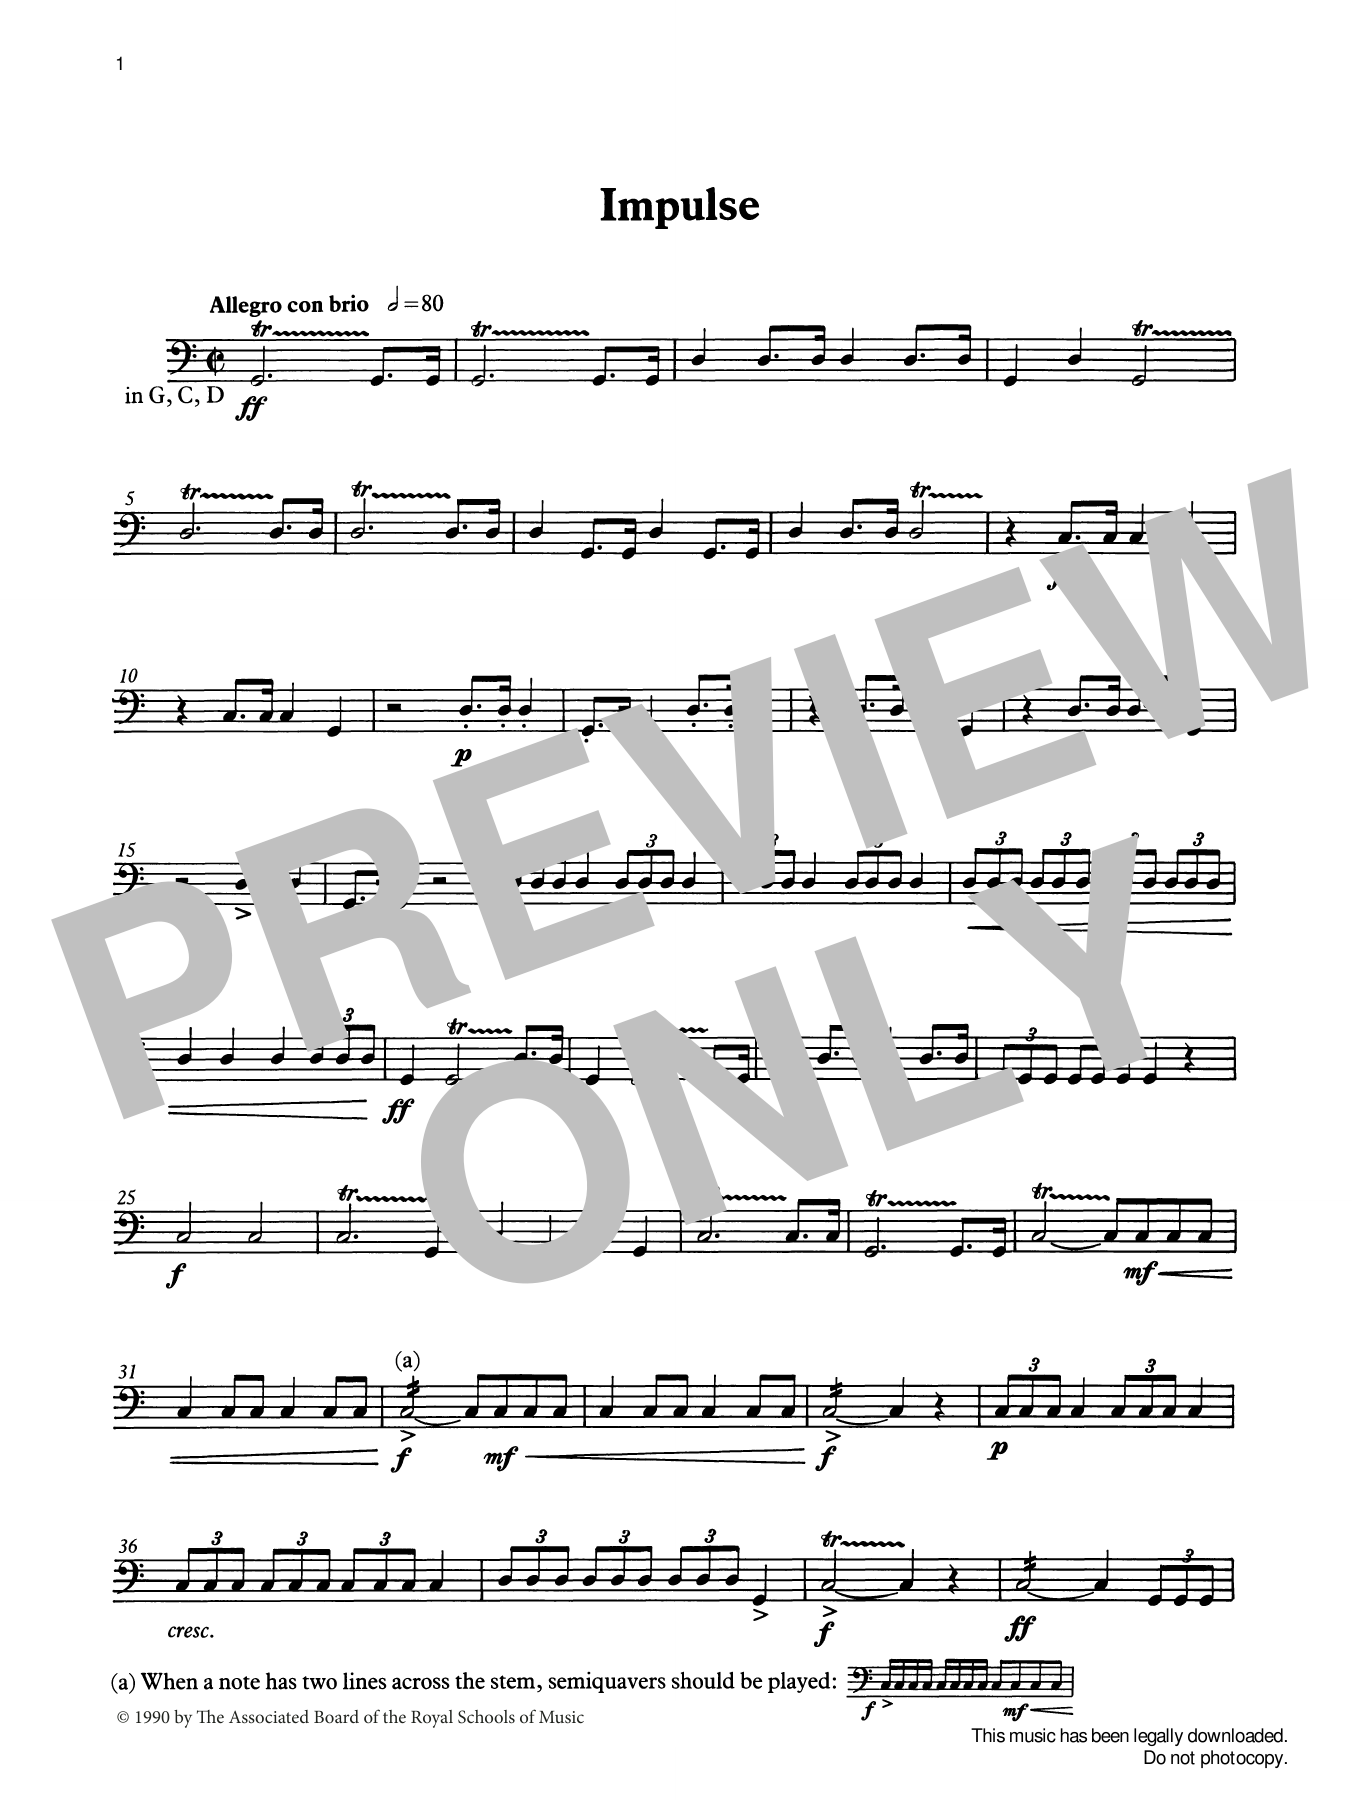 Download Ian Wright Impulse from Graded Music for Timpani, Sheet Music